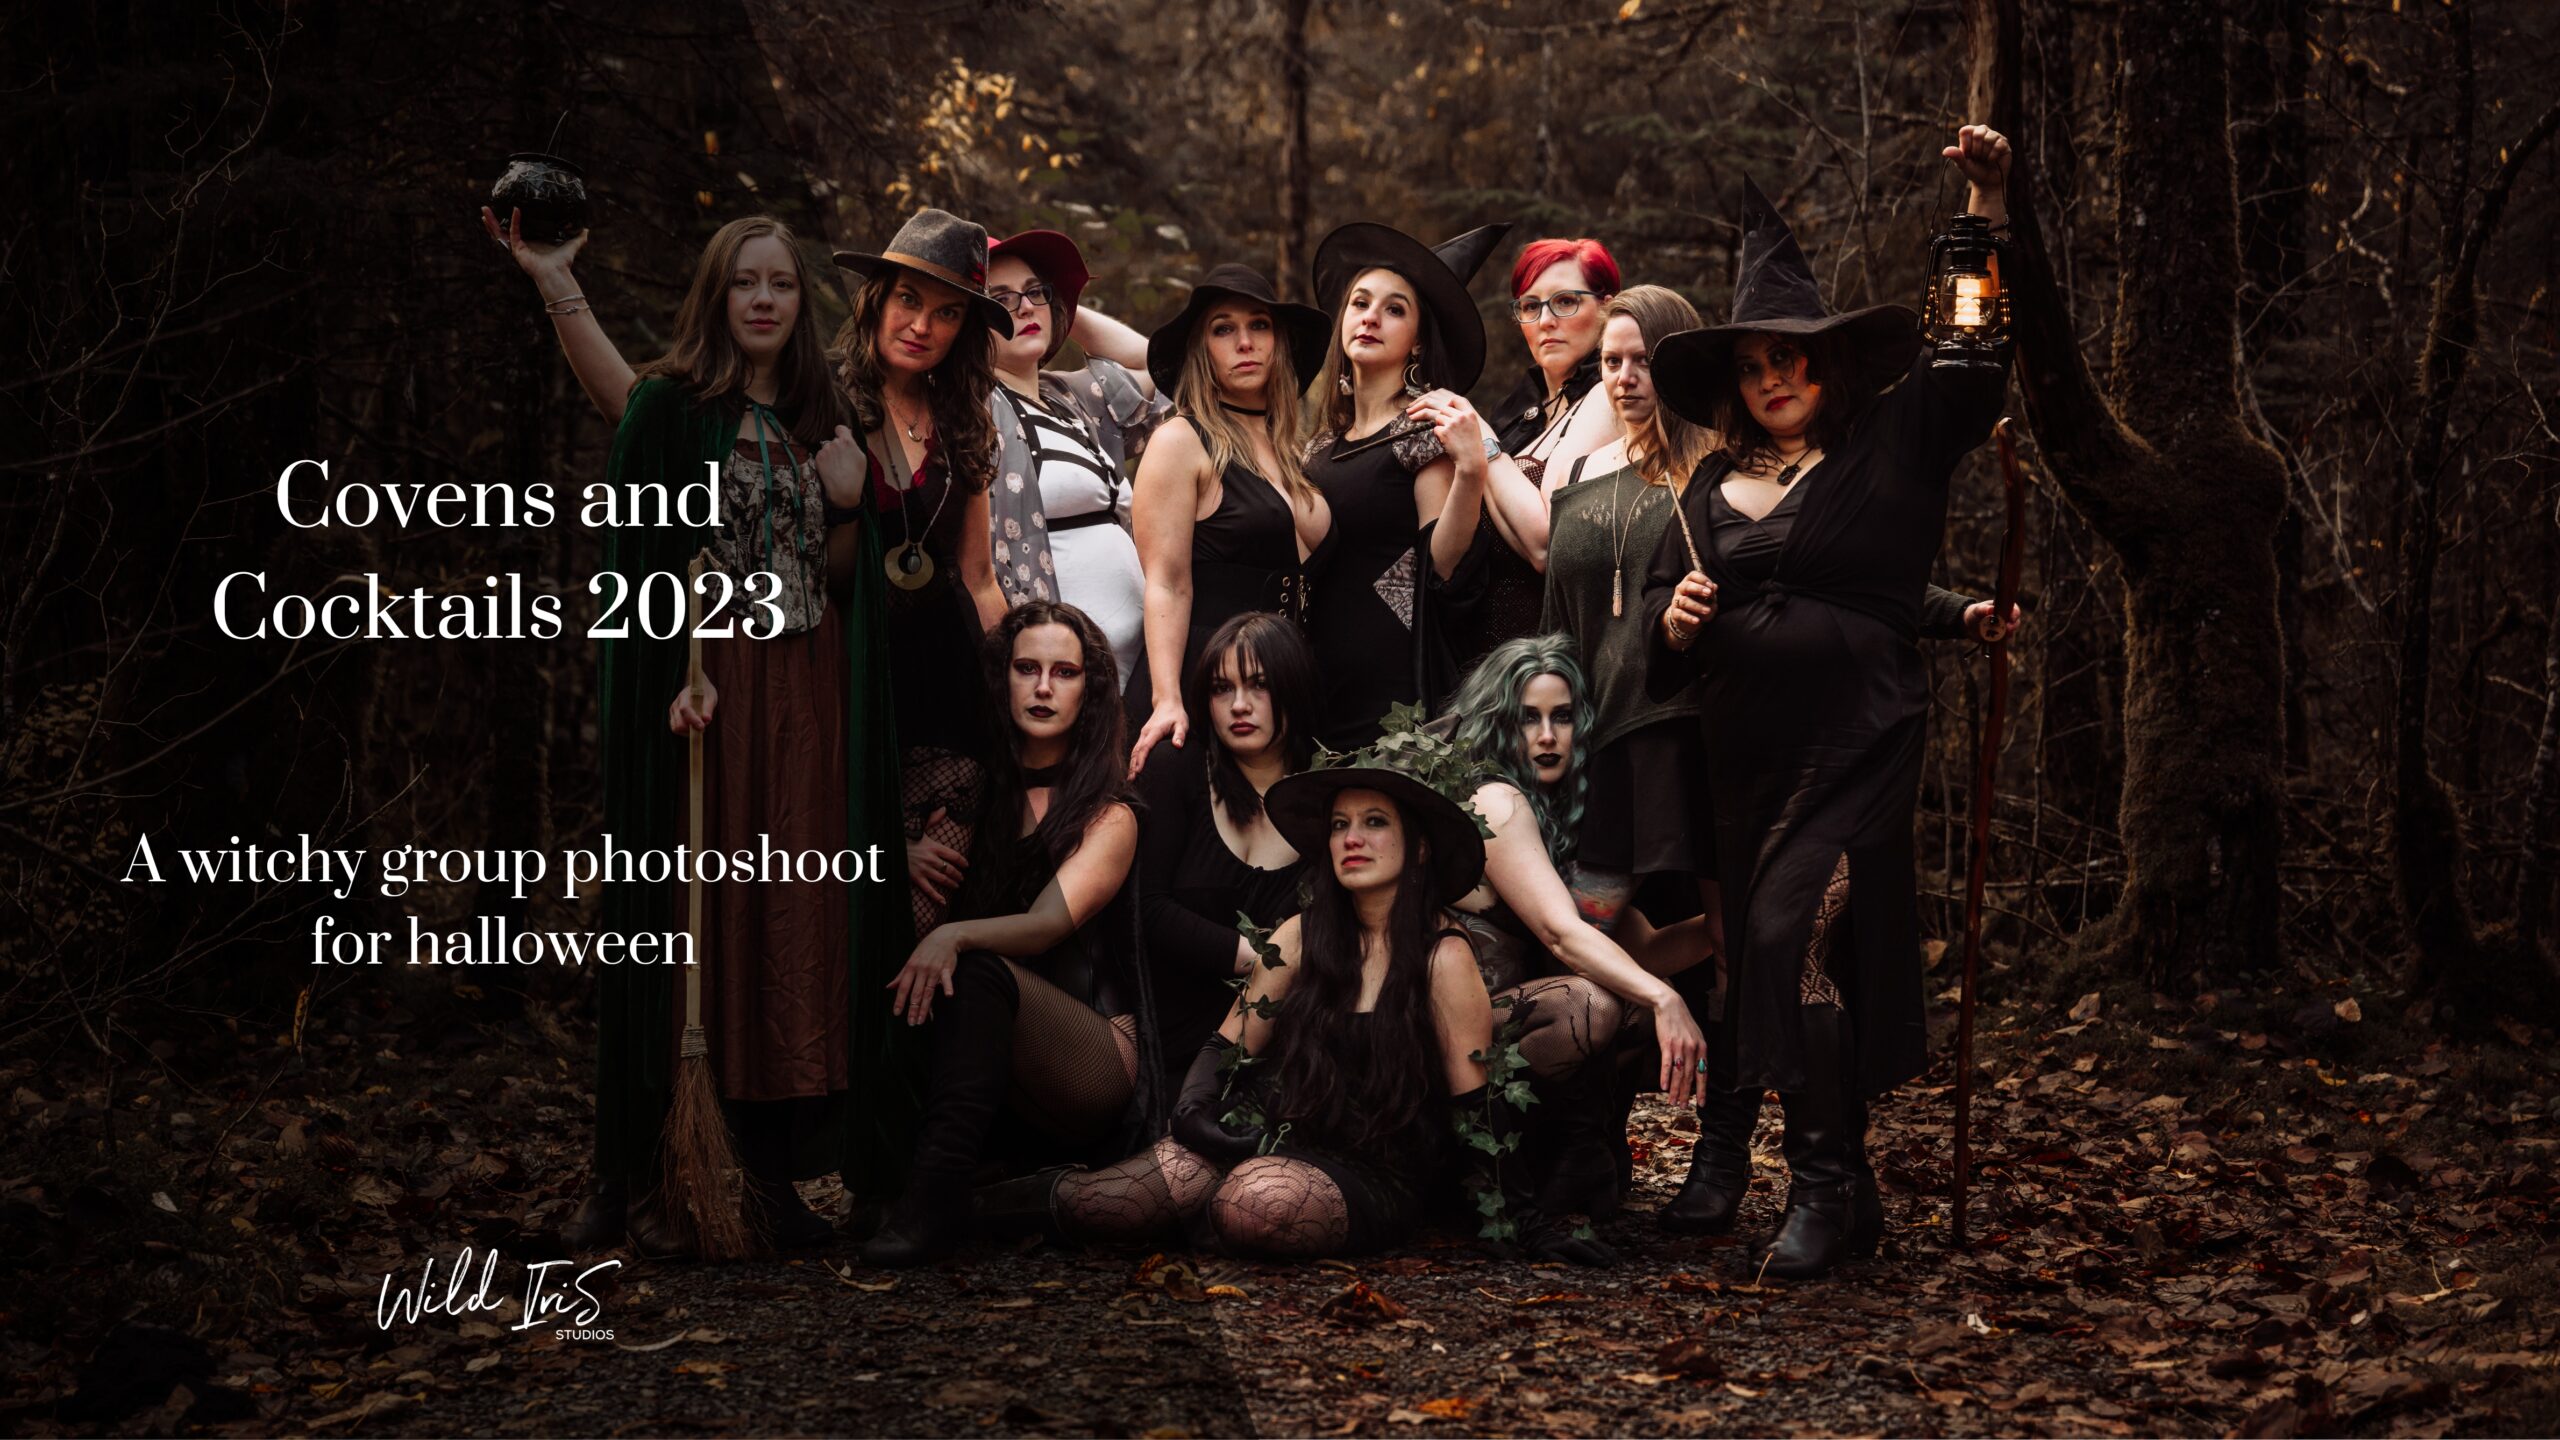 A witchy group halloween photoshoot